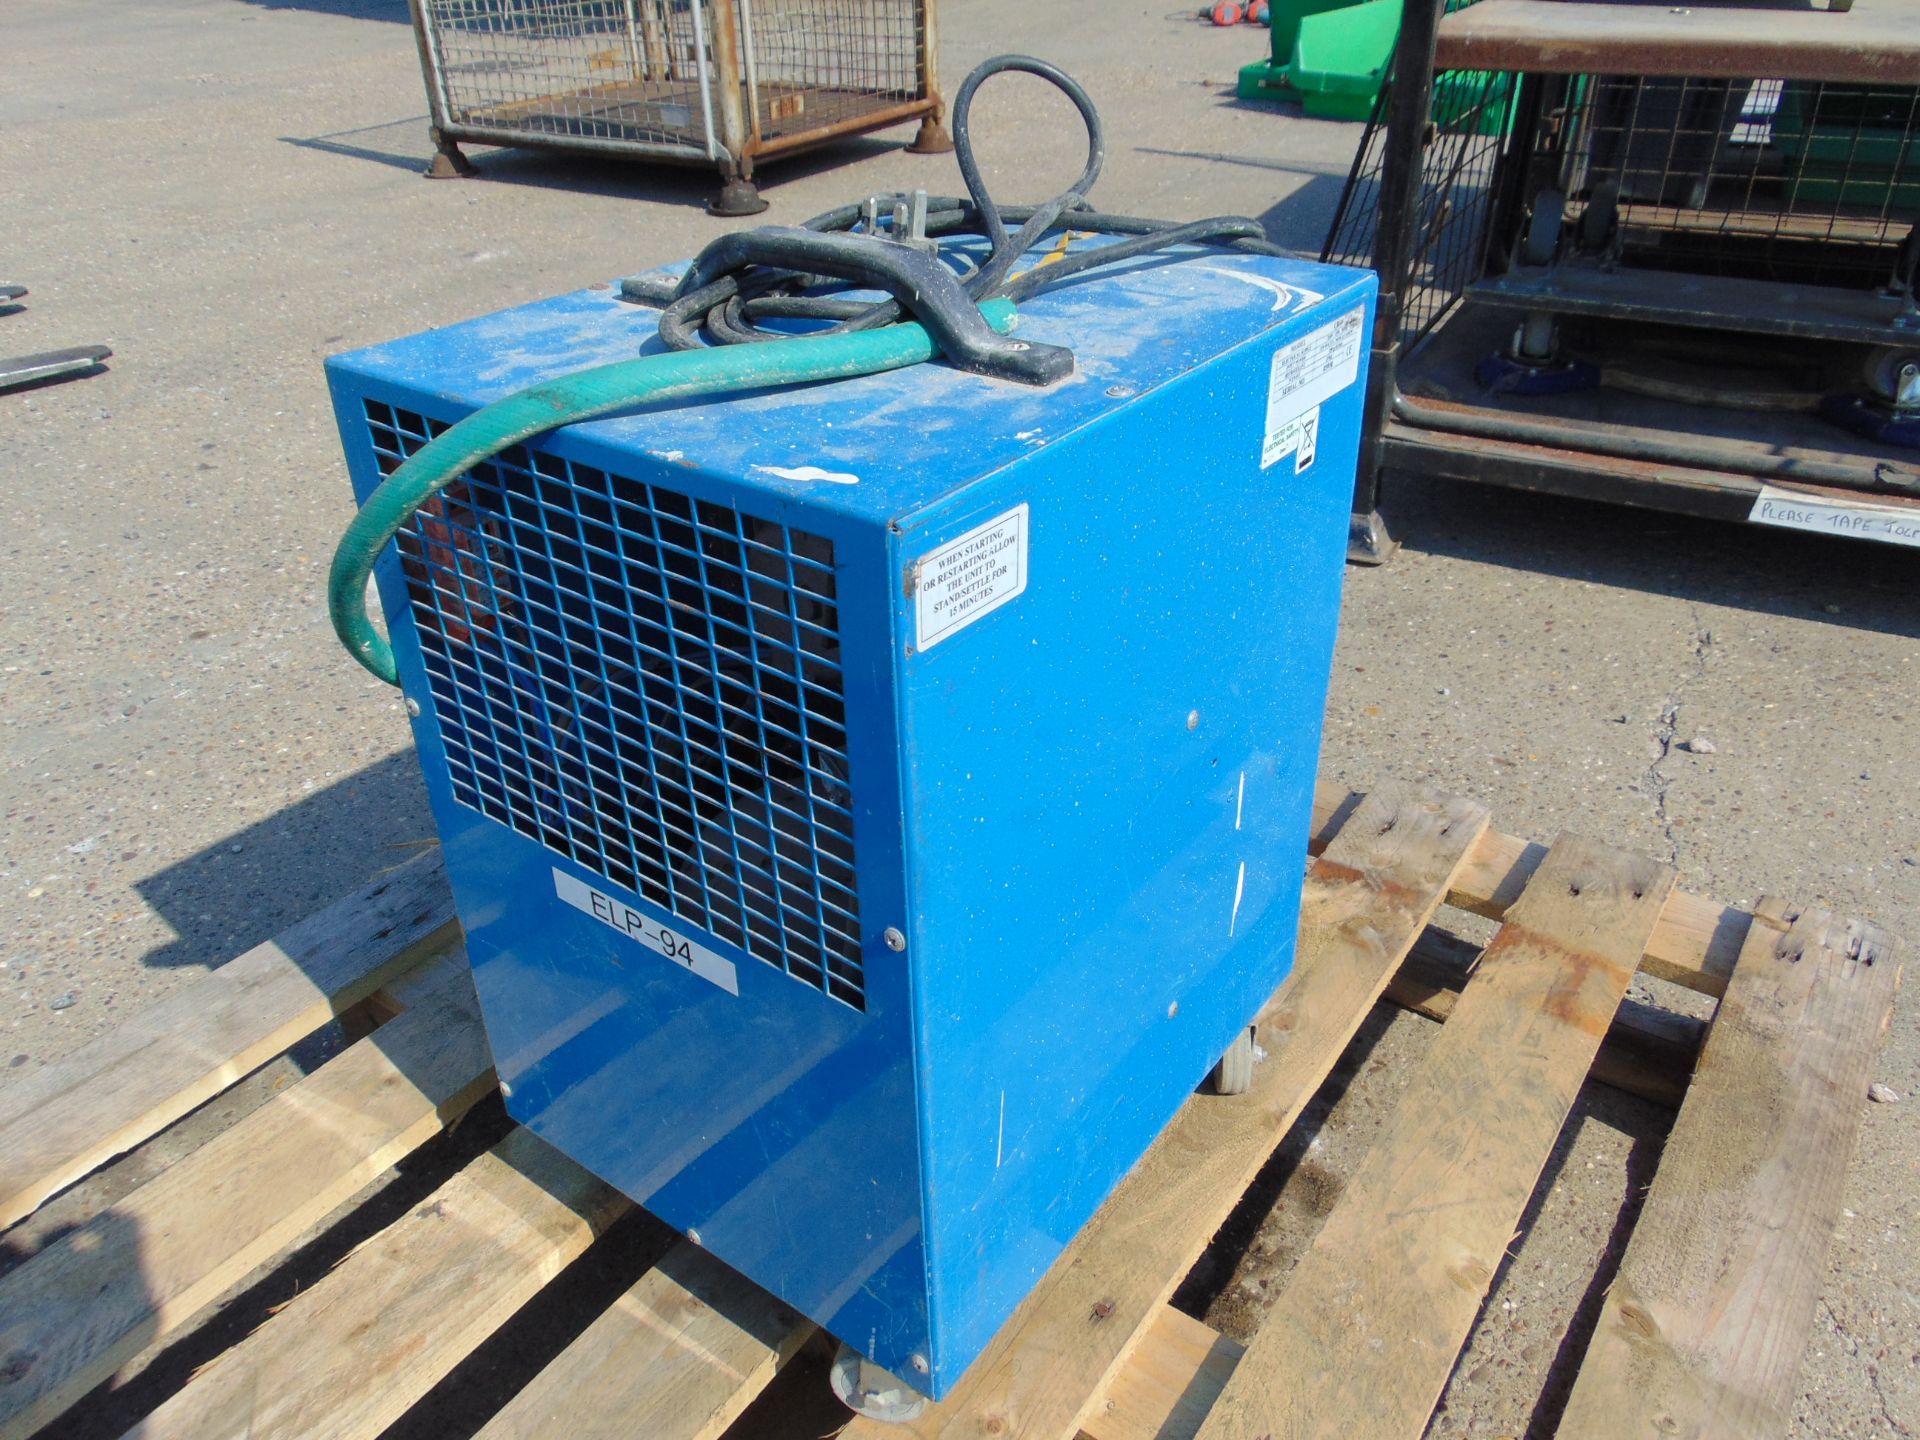 Broughton CR40 - 40 Litre Commercial Dehumidifier - Image 3 of 5